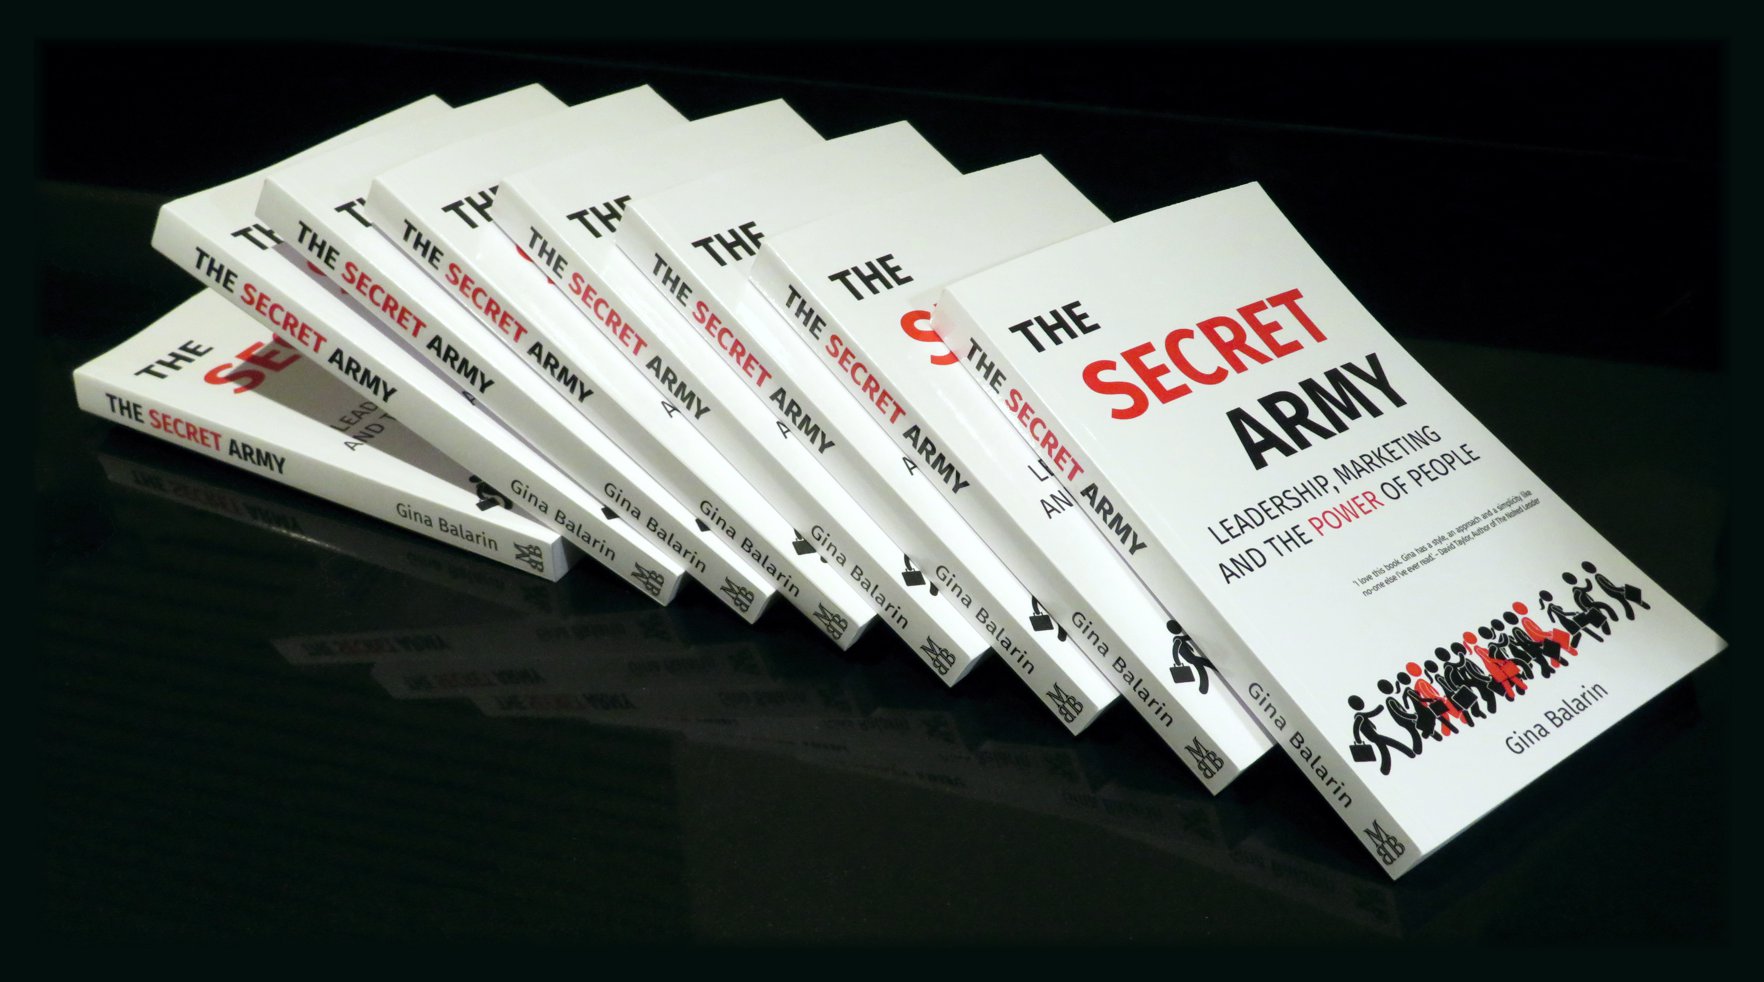 Gina Balarin author of The Secret Army: Leadership, Marketing and the Power of People